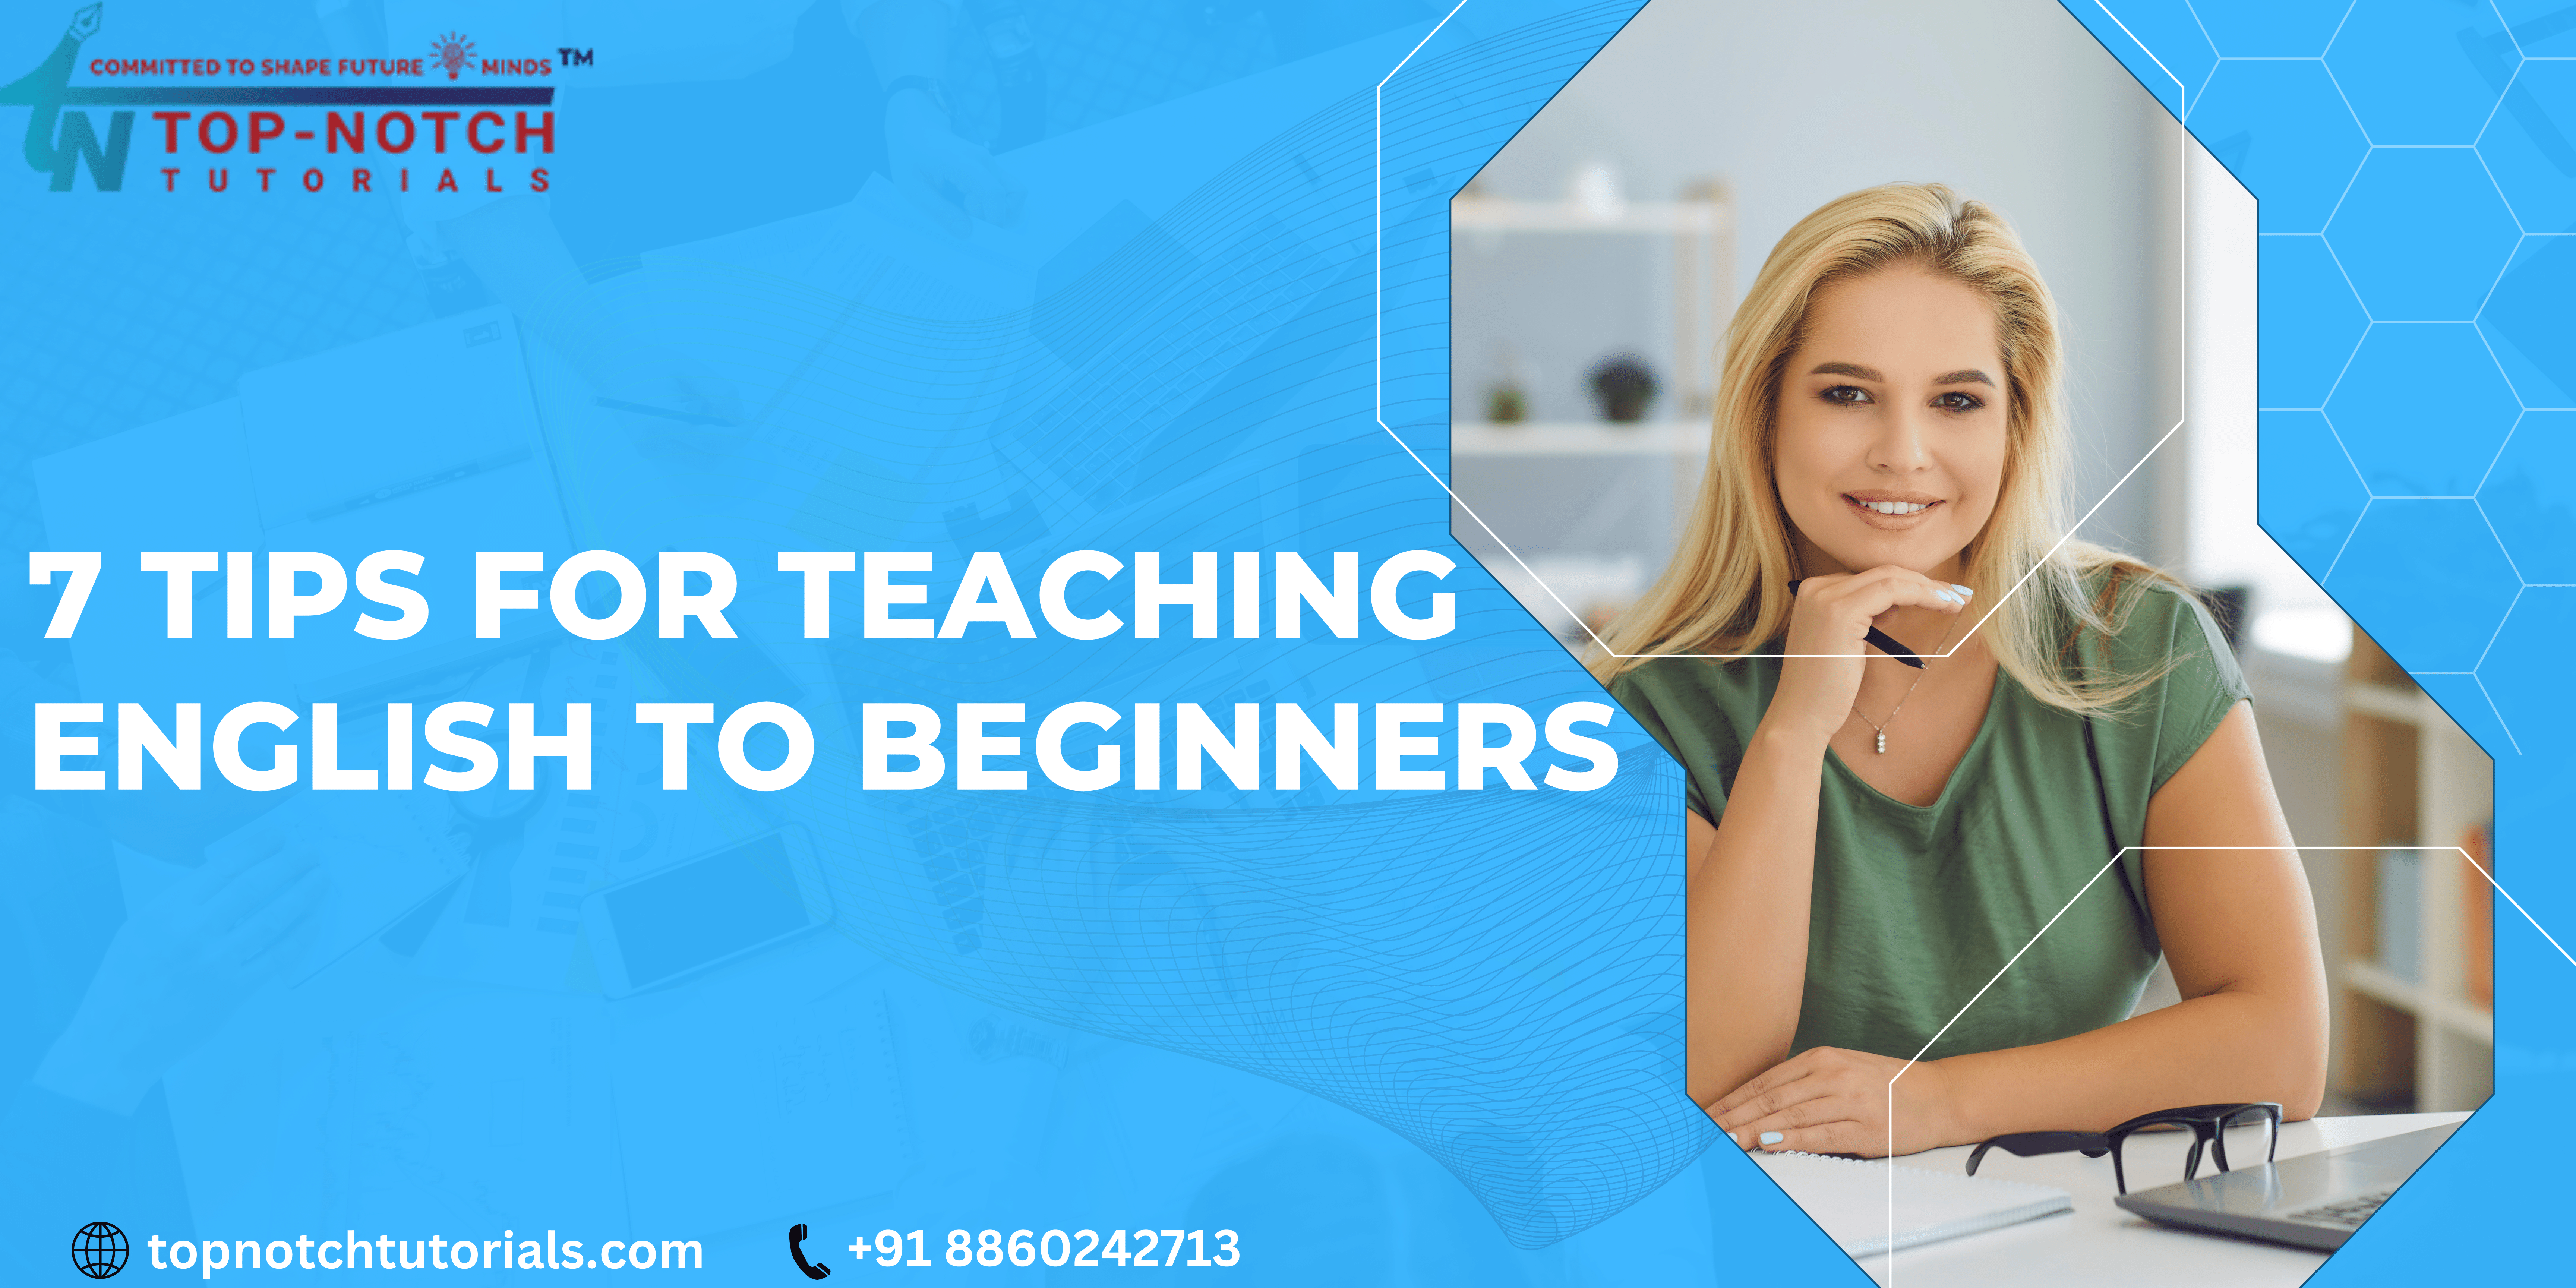 7 Tips For Teaching English to Beginners